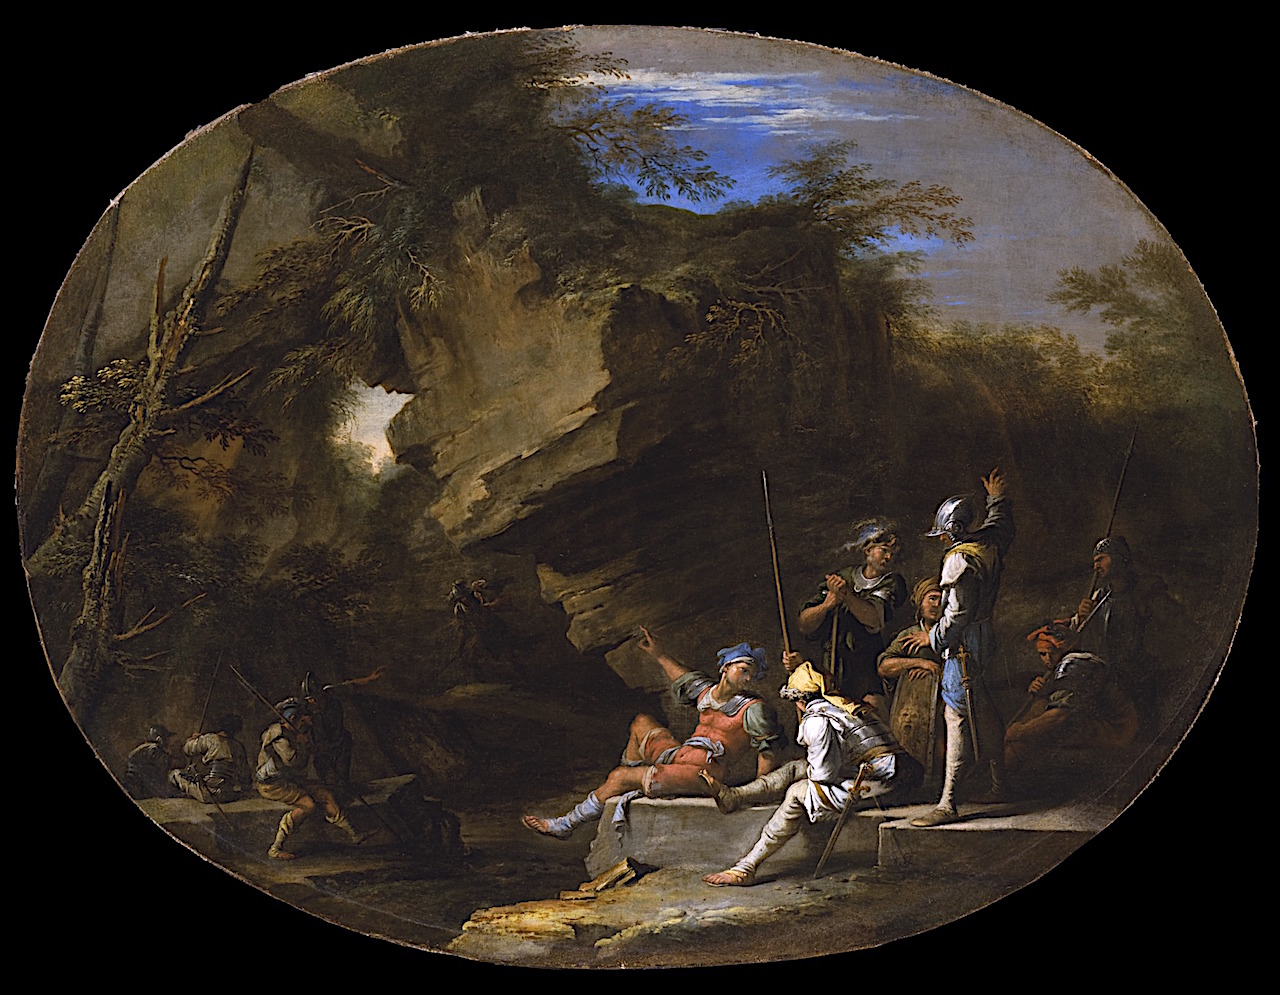 Rosa 1640 ca Landscape with Armed Men Los Angeles County Museum of Art